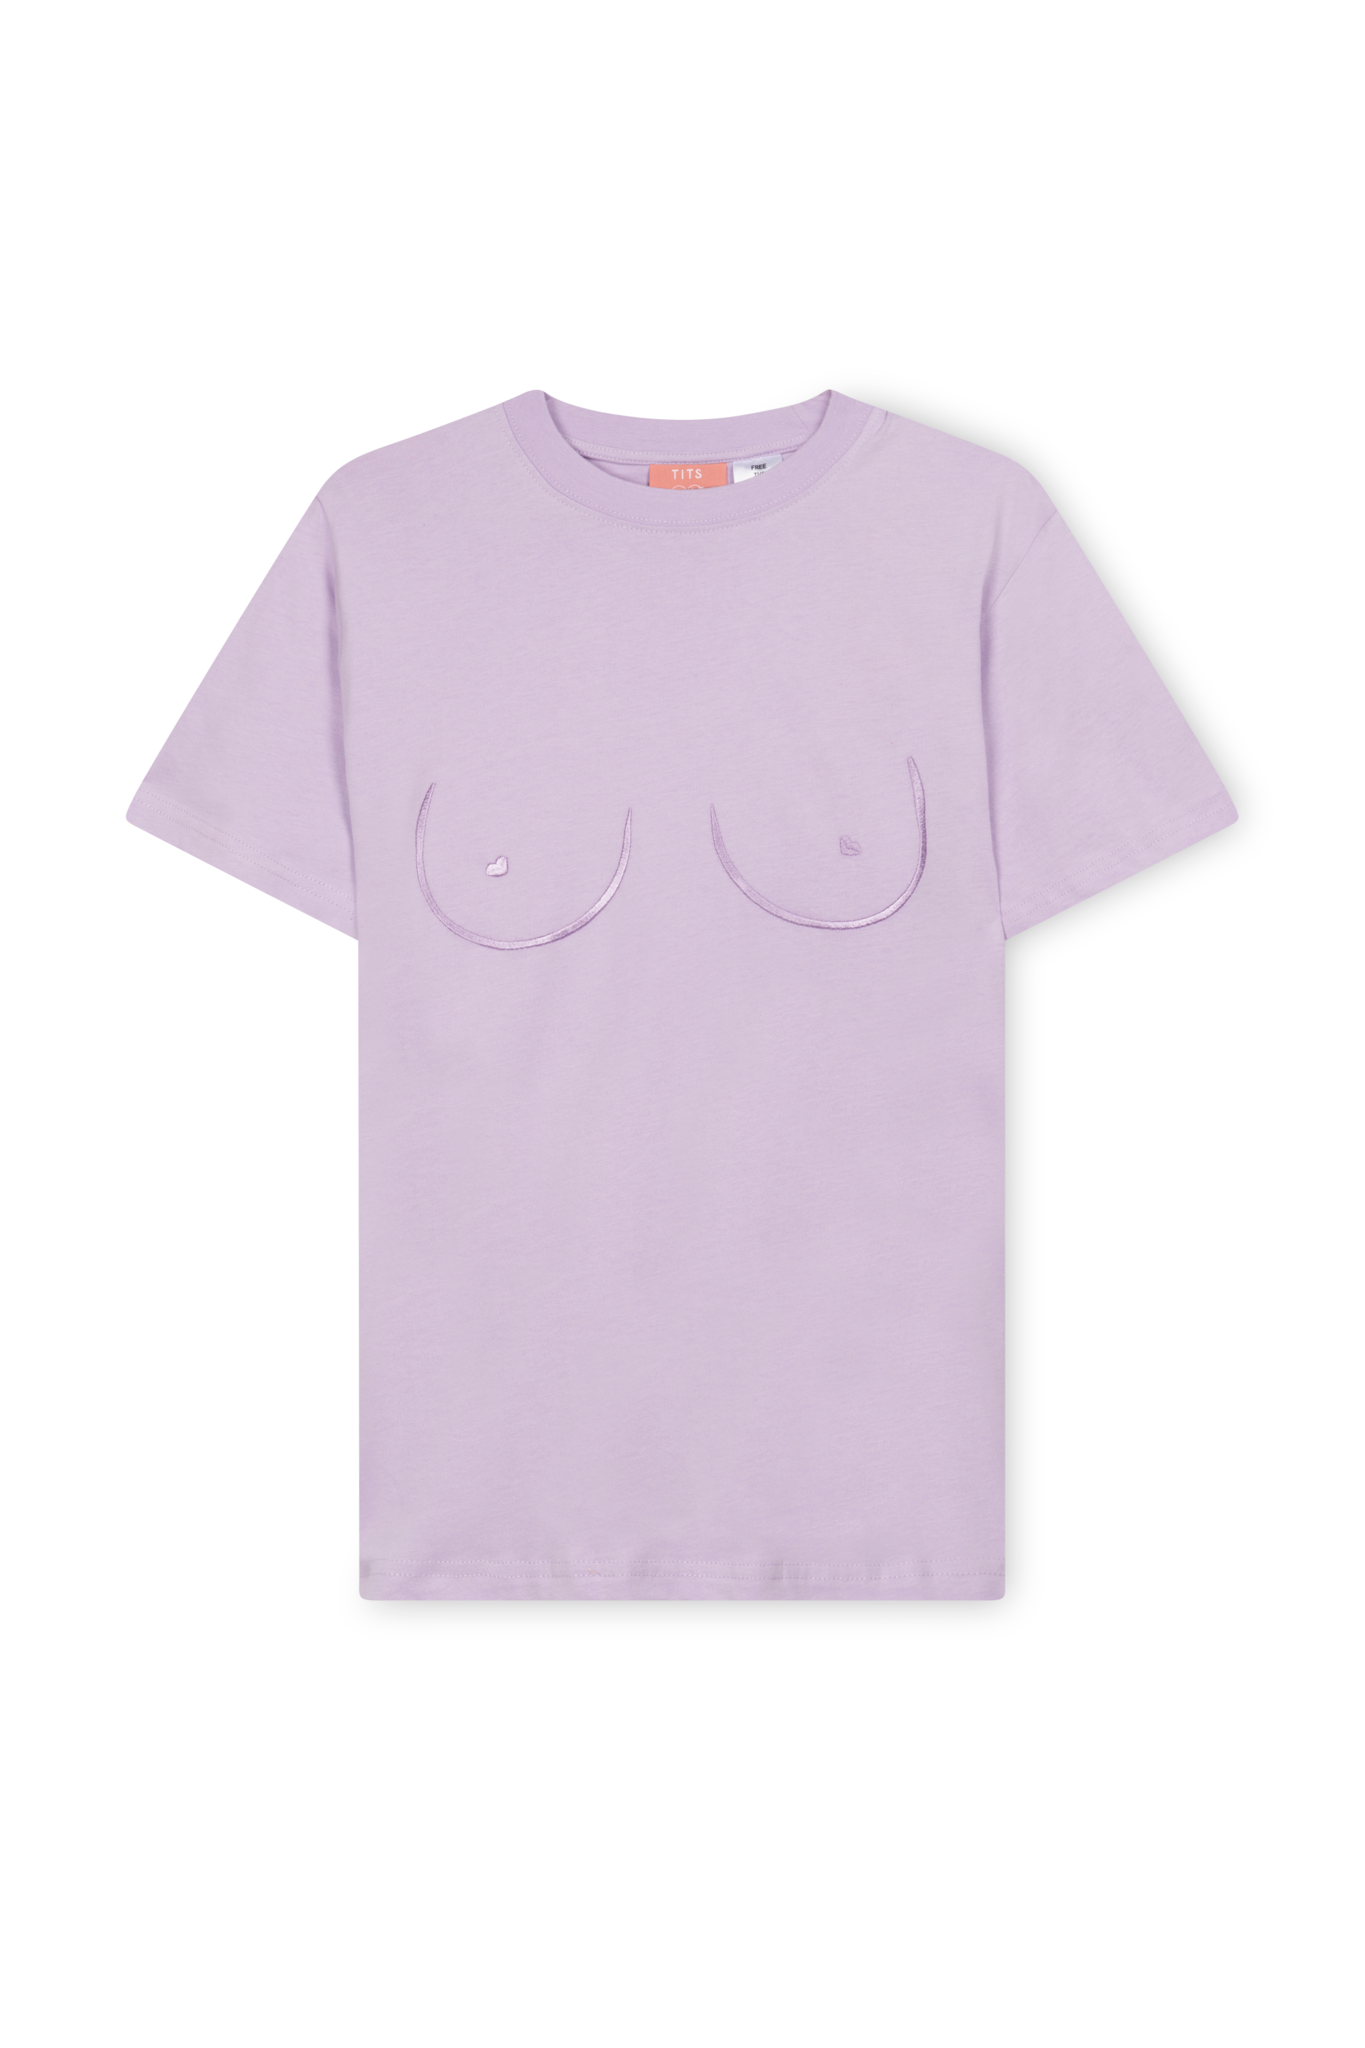 Tits Shirt in Lilac by T.I.T.S.